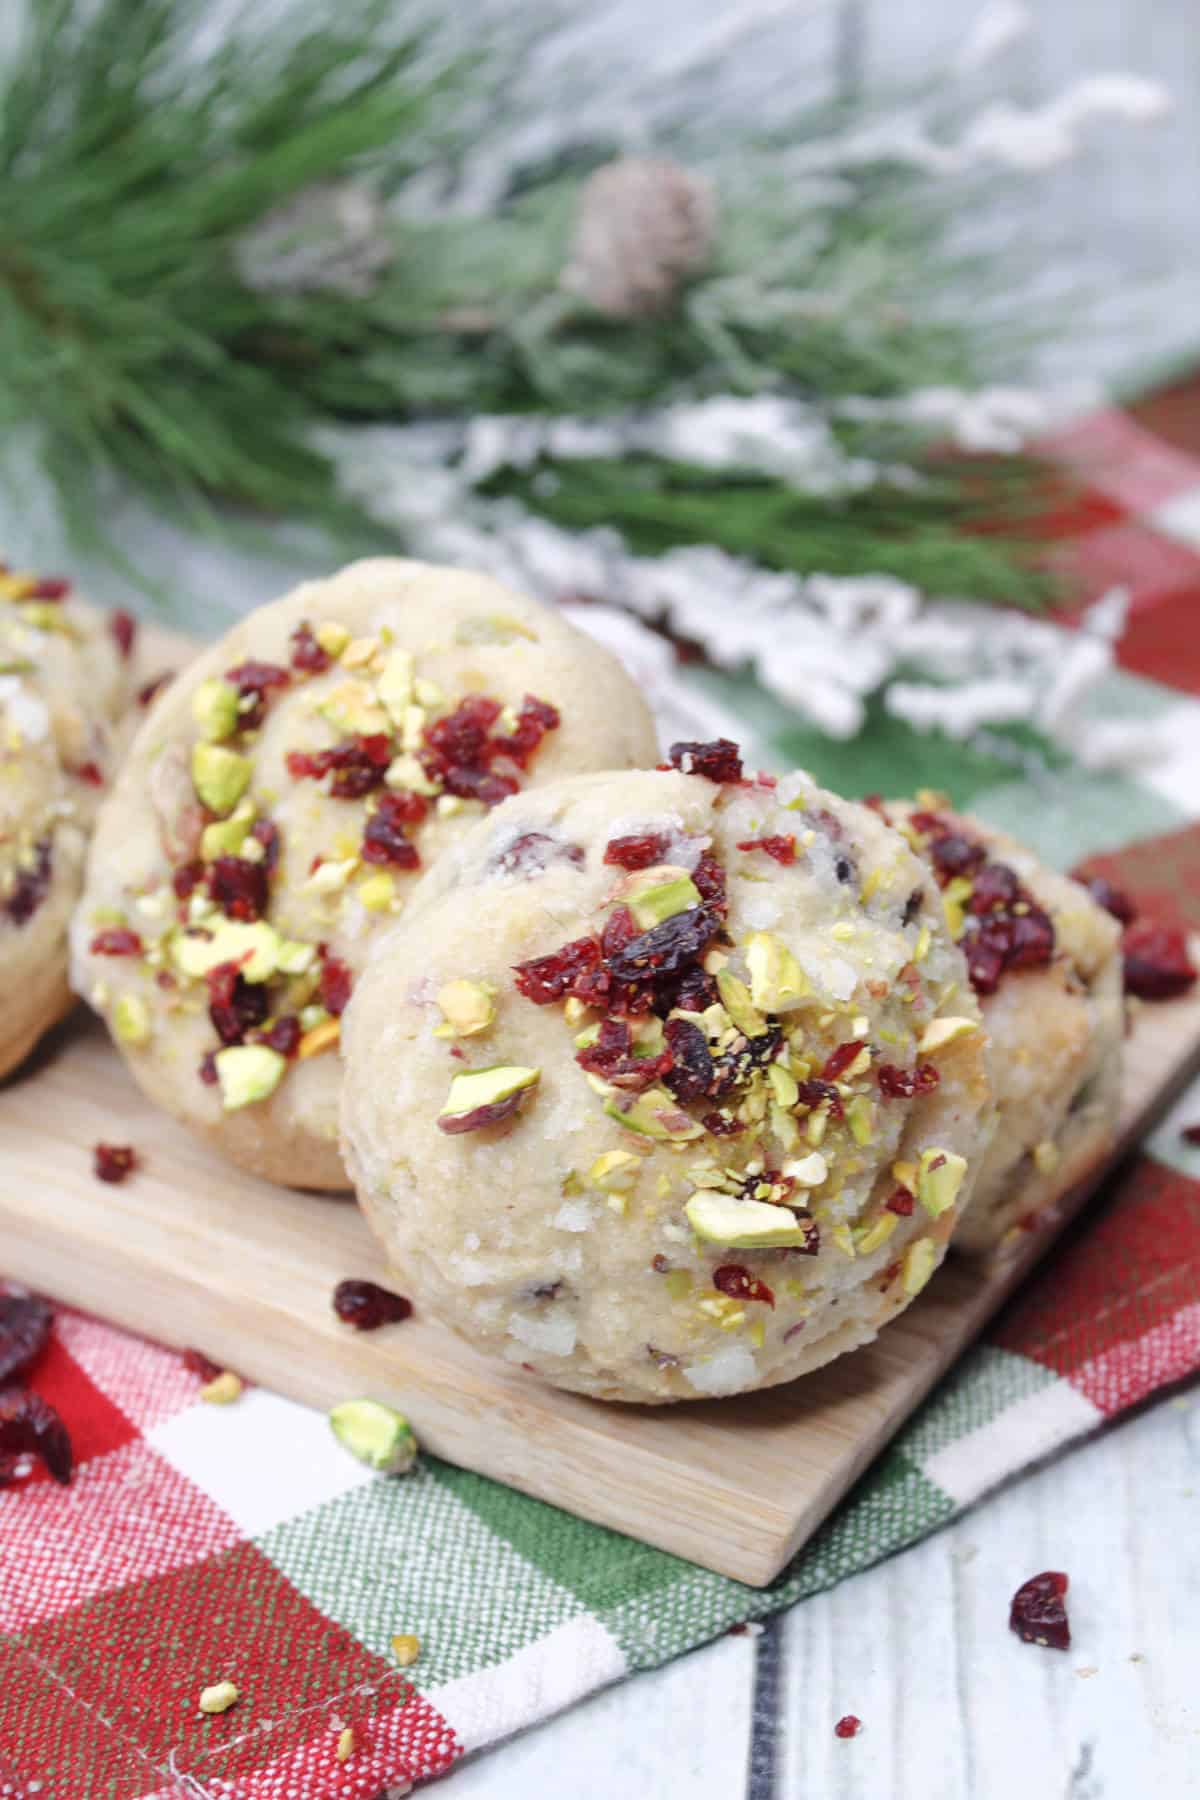 shortbread cookies with pistachios and cranberries on plaid napkin.